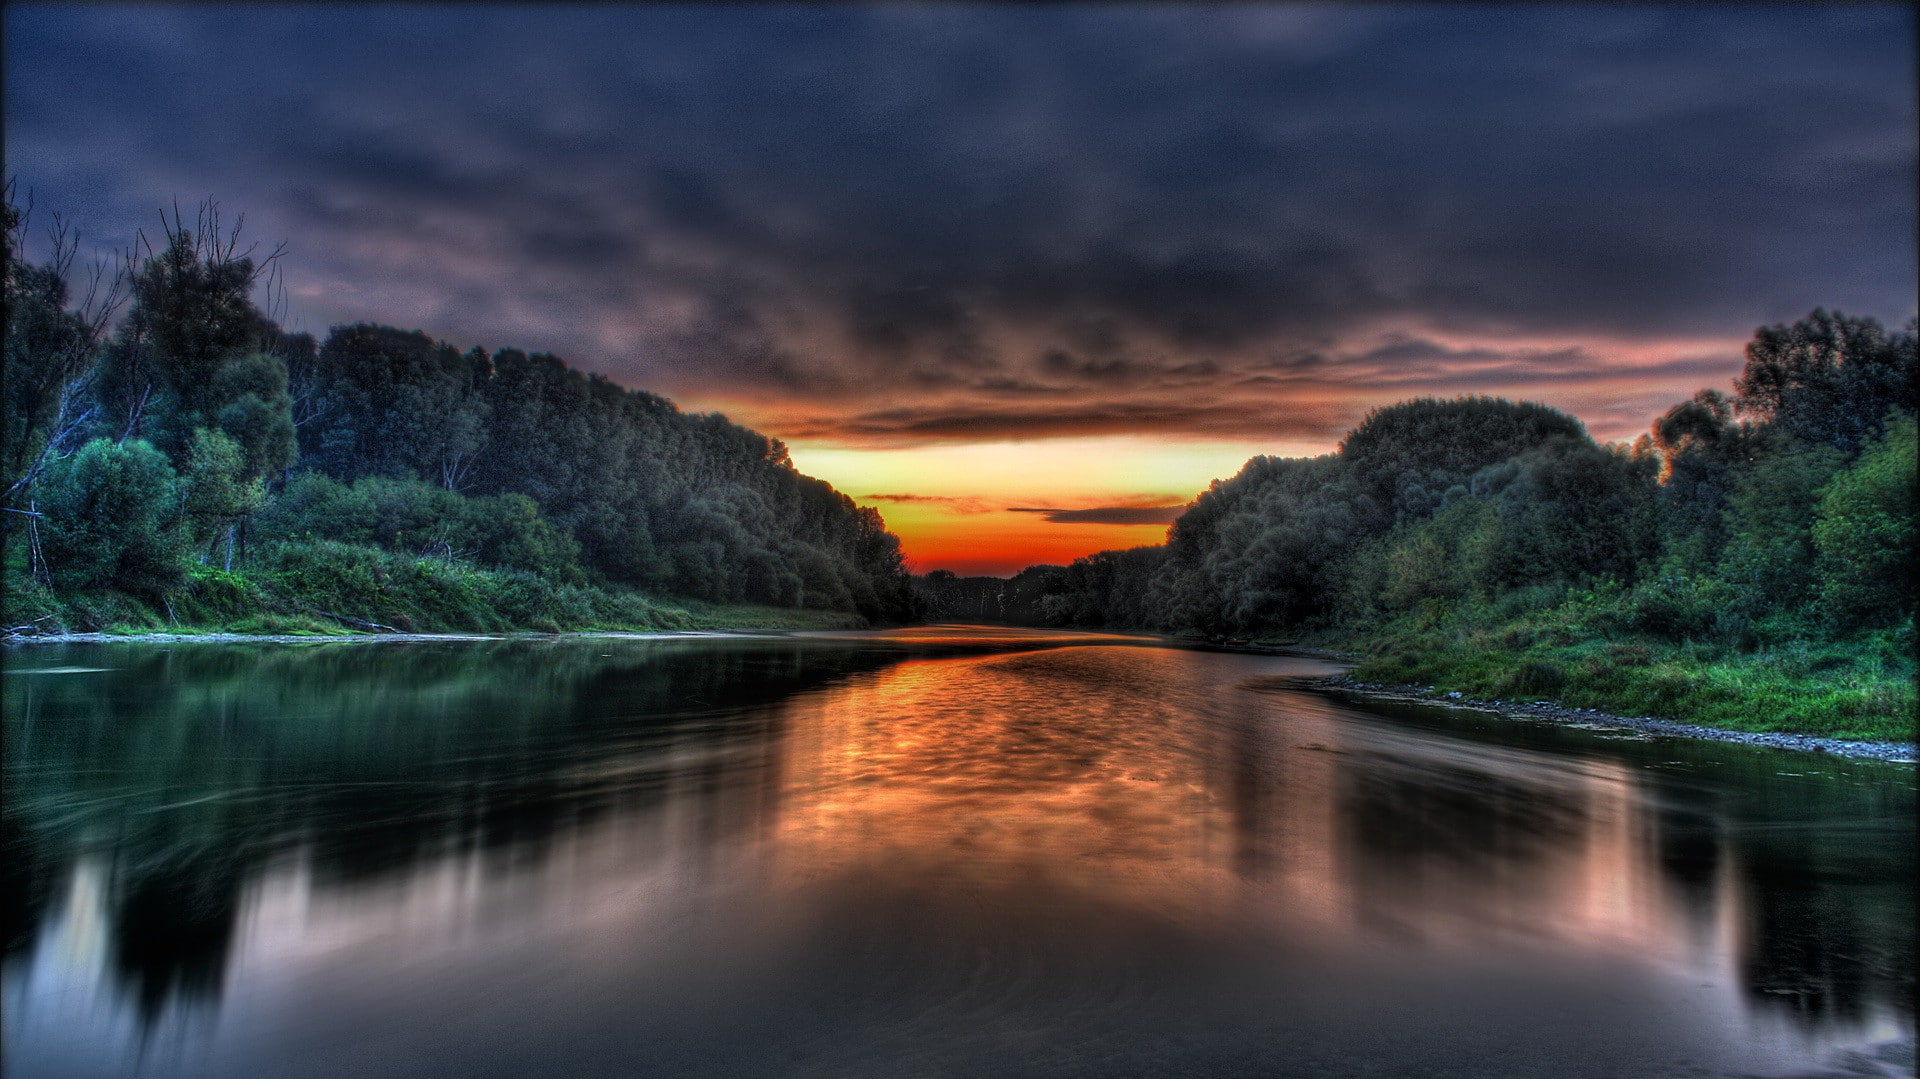 donau,germany, sunset, HDR, river, sunlight, sky, clouds